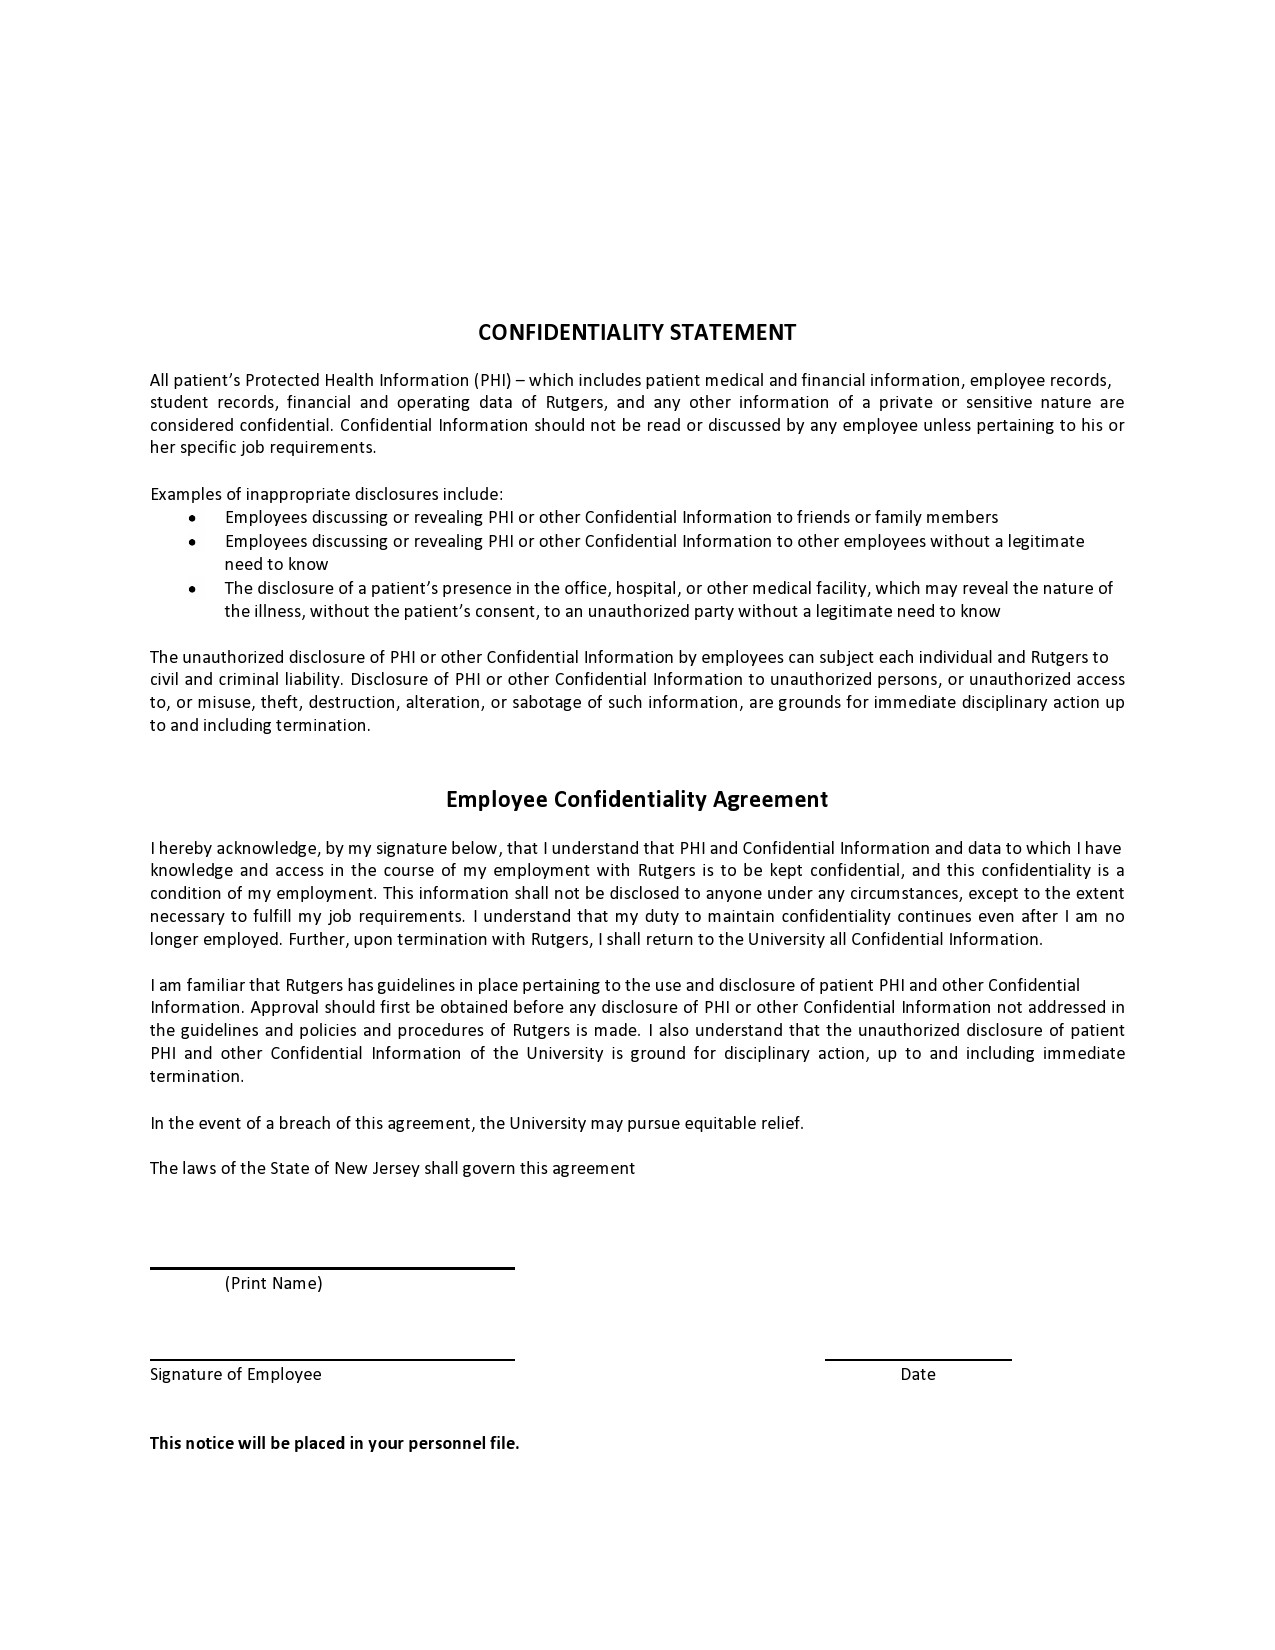 Free confidentiality statement 01